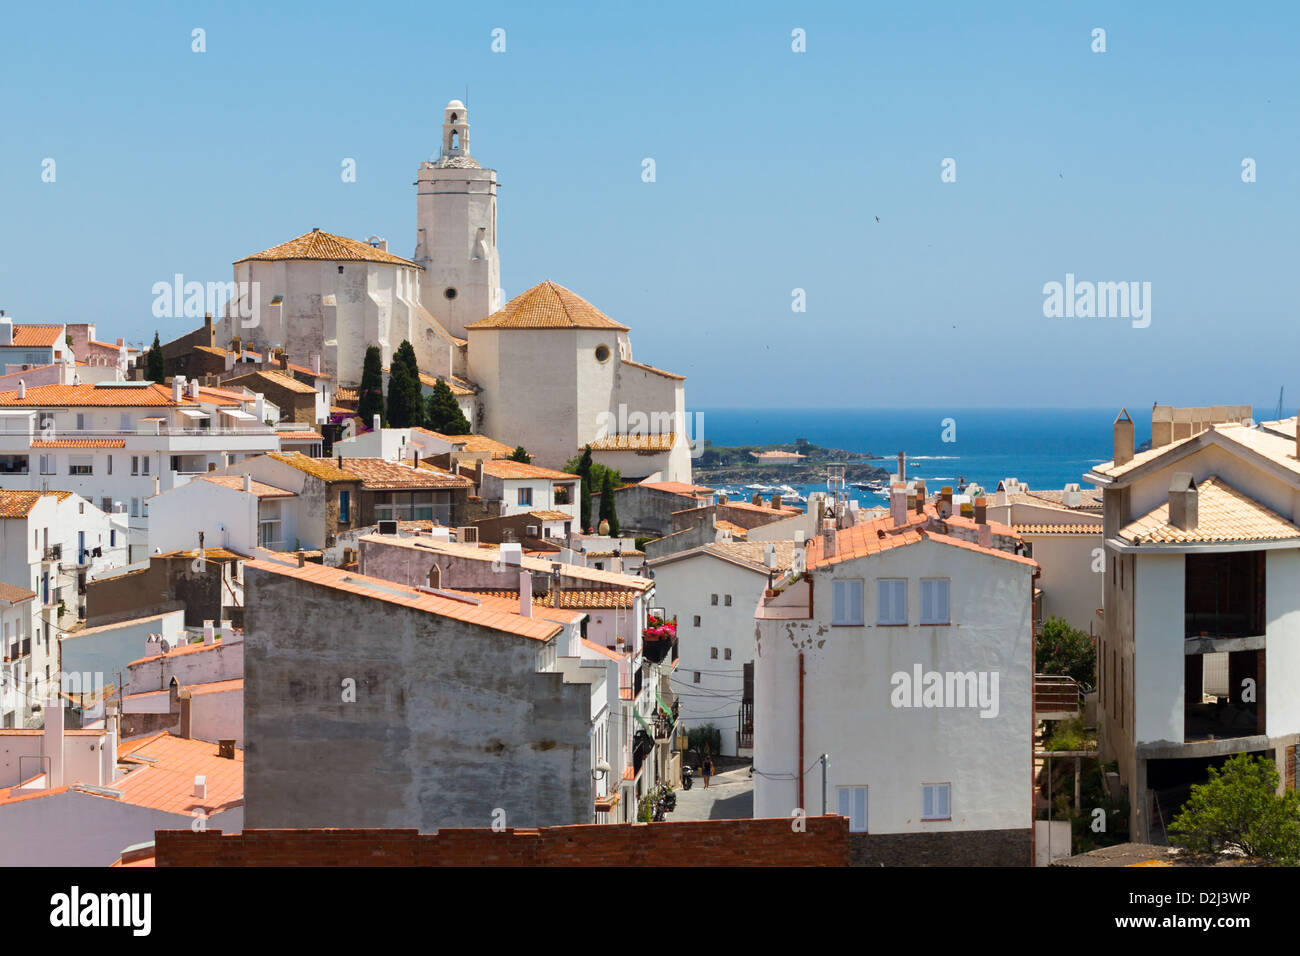 Panorama of white village houses and church tower in Cadaques, Spain Stock Photo